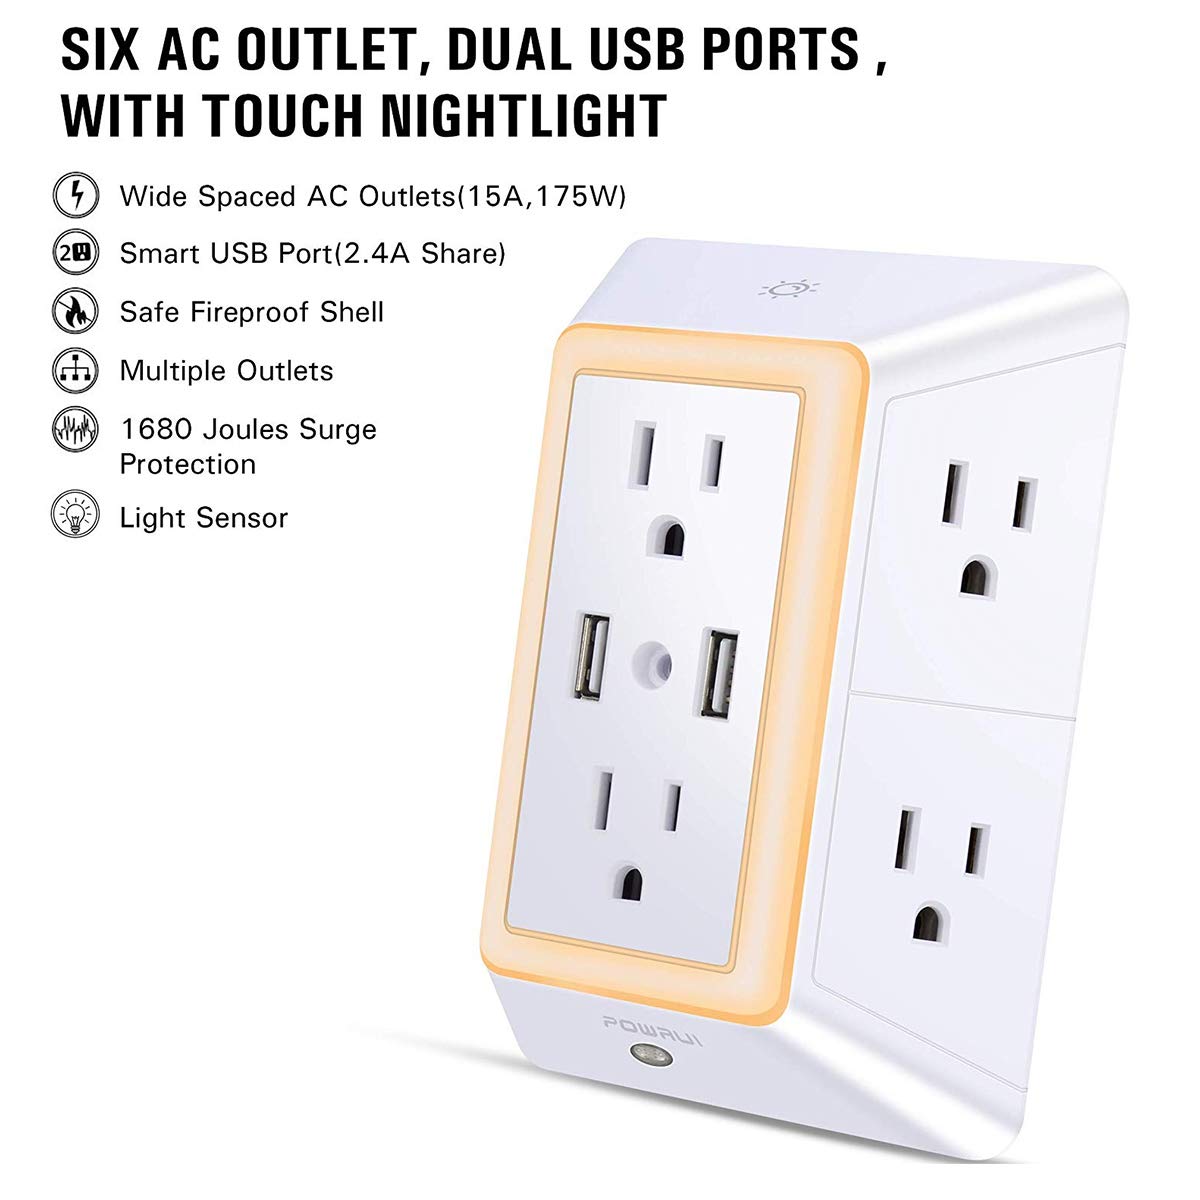 USB Wall Charger, Surge Protector, POWRUI 6-Outlet Extender with 2 USB Charging Ports (2.4A Total) and Night Light, 3-Sided Power Strip with Adapter Spaced Outlets - White，ETL Listed